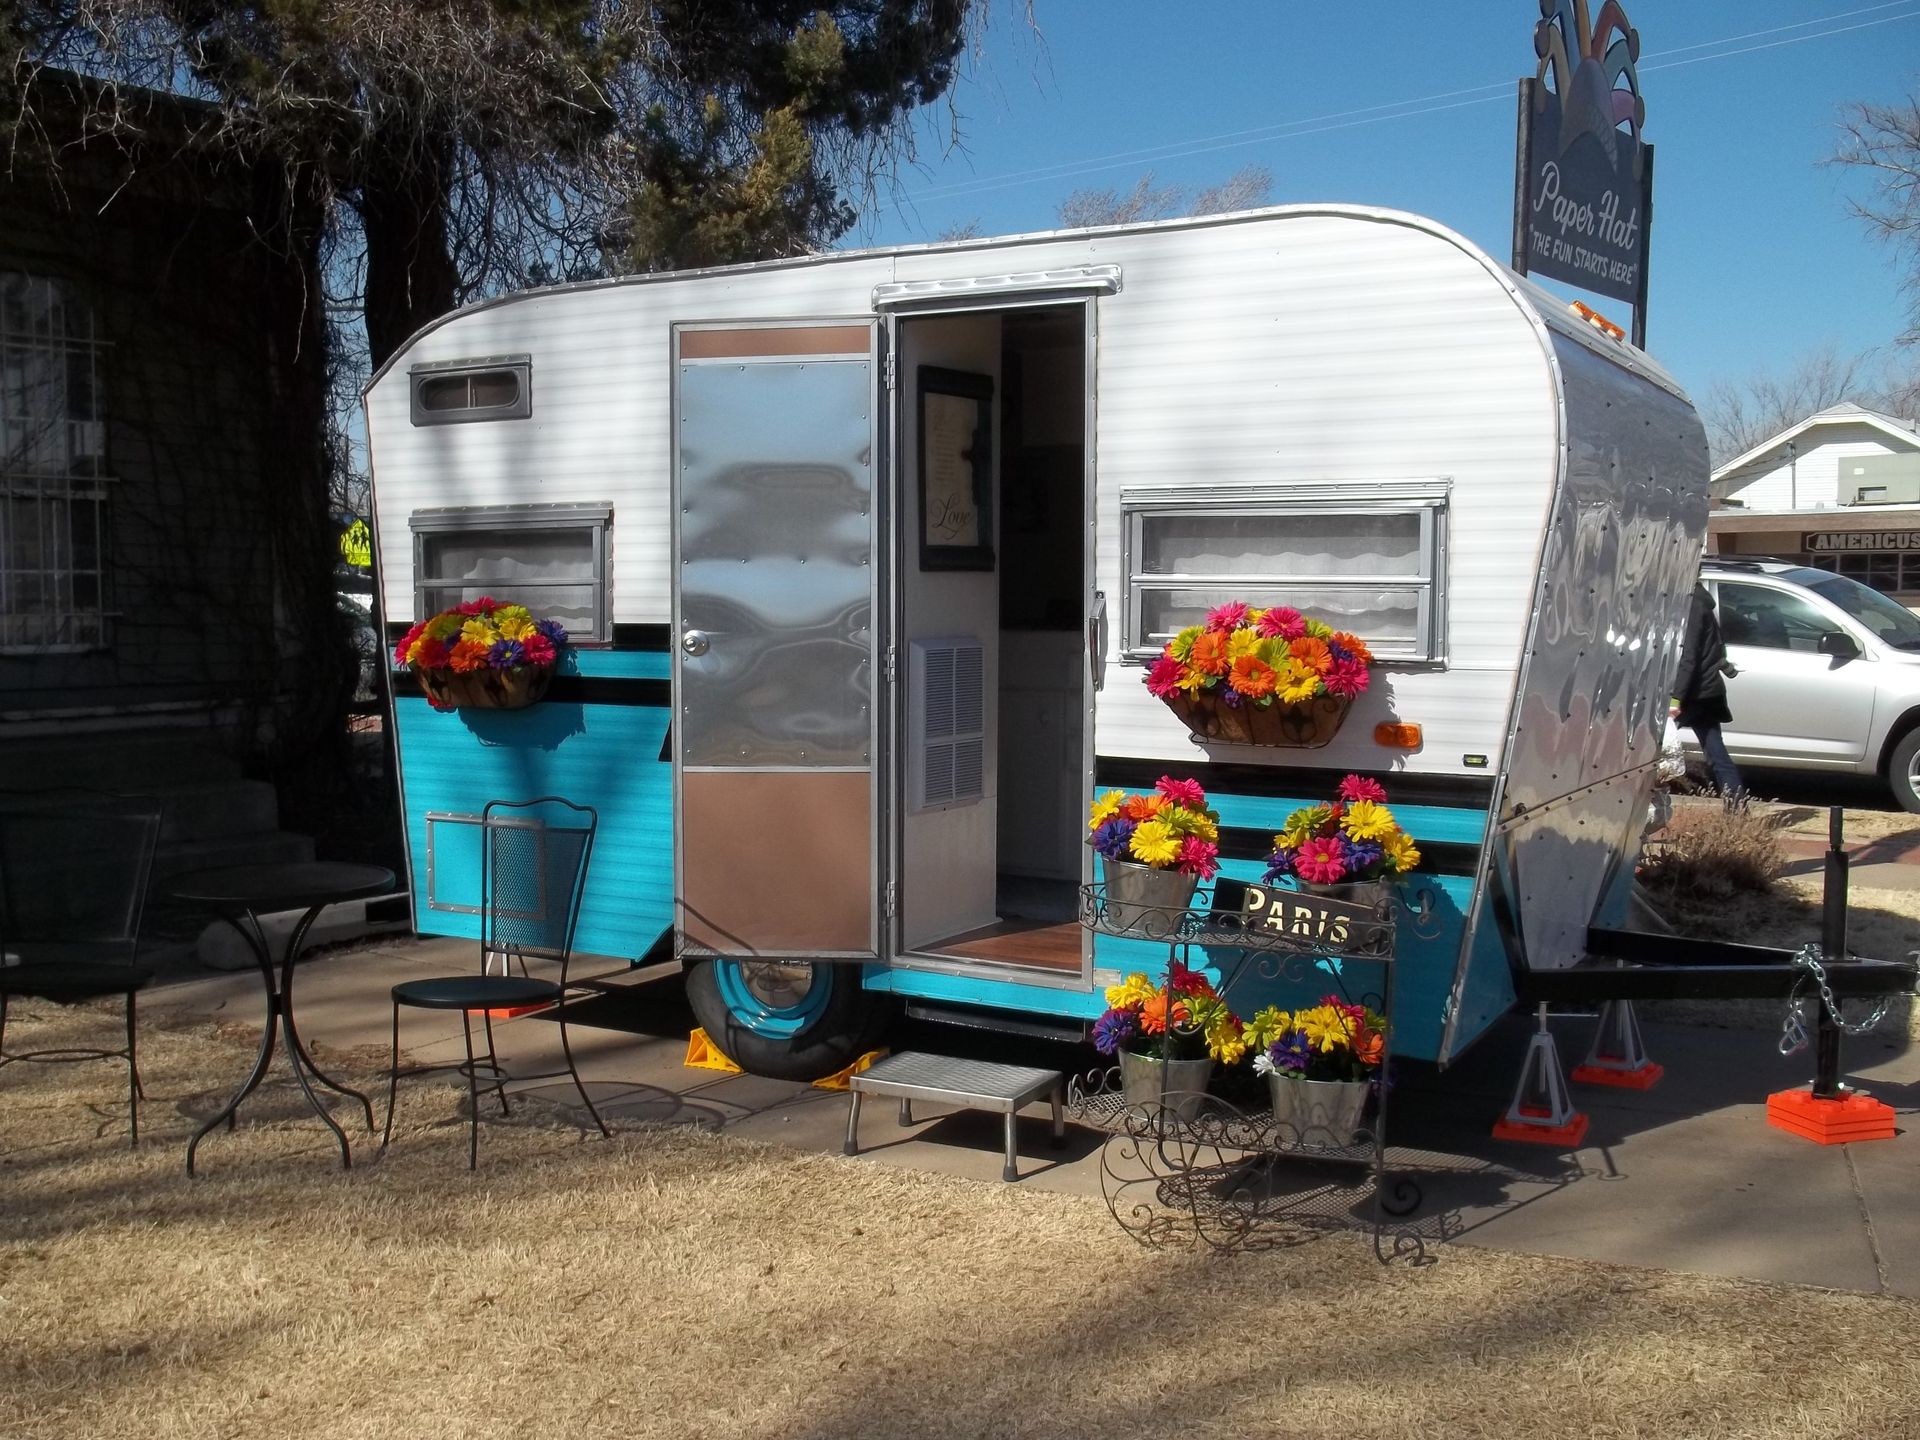 Camping trailer on historic route 66 in Amarillo, Texas